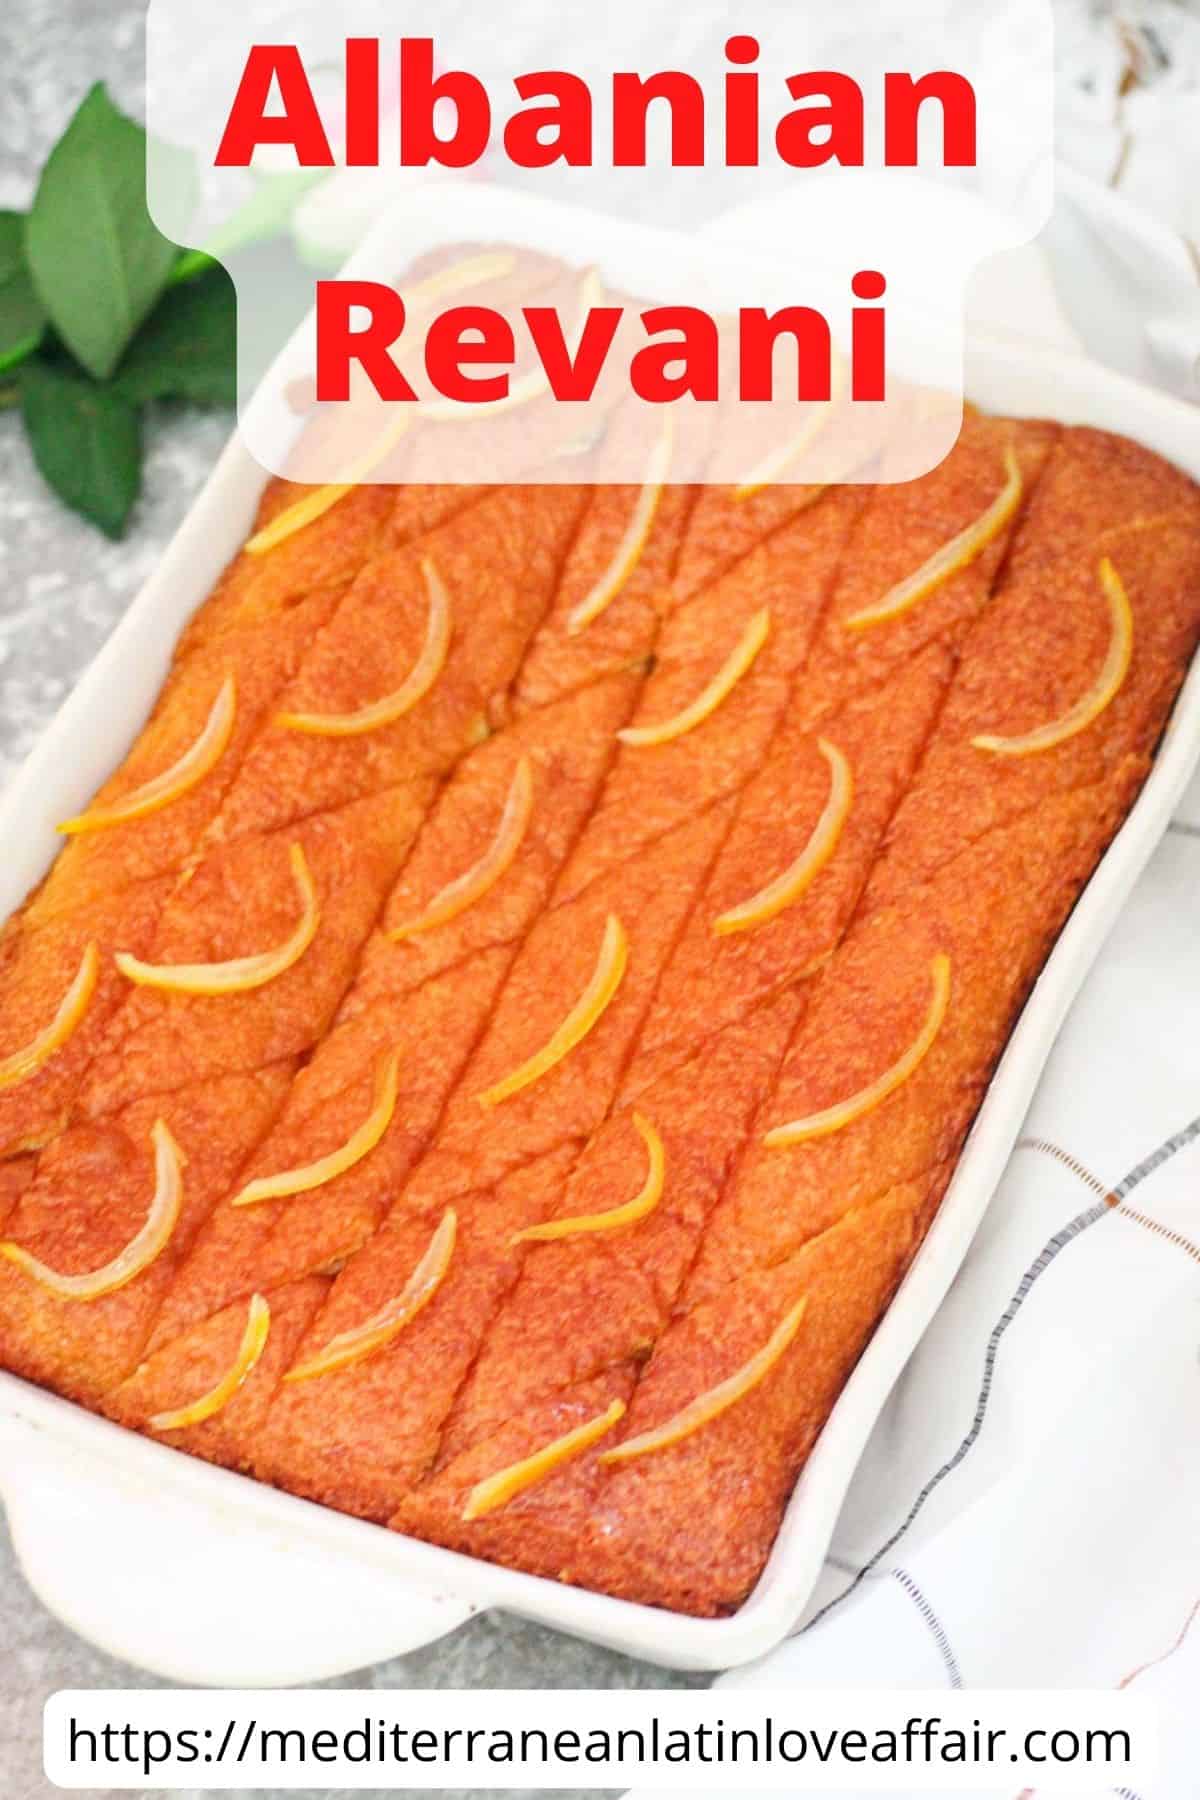 An image prepared for Pinterest. It shows a baked cake on a rectangular baking dish. Cake is cut in diamond shapes, garnished with lemon peels and soaked in syrup. There's a title bar that reads Albanian Revani and a bottom bar with the website link. 